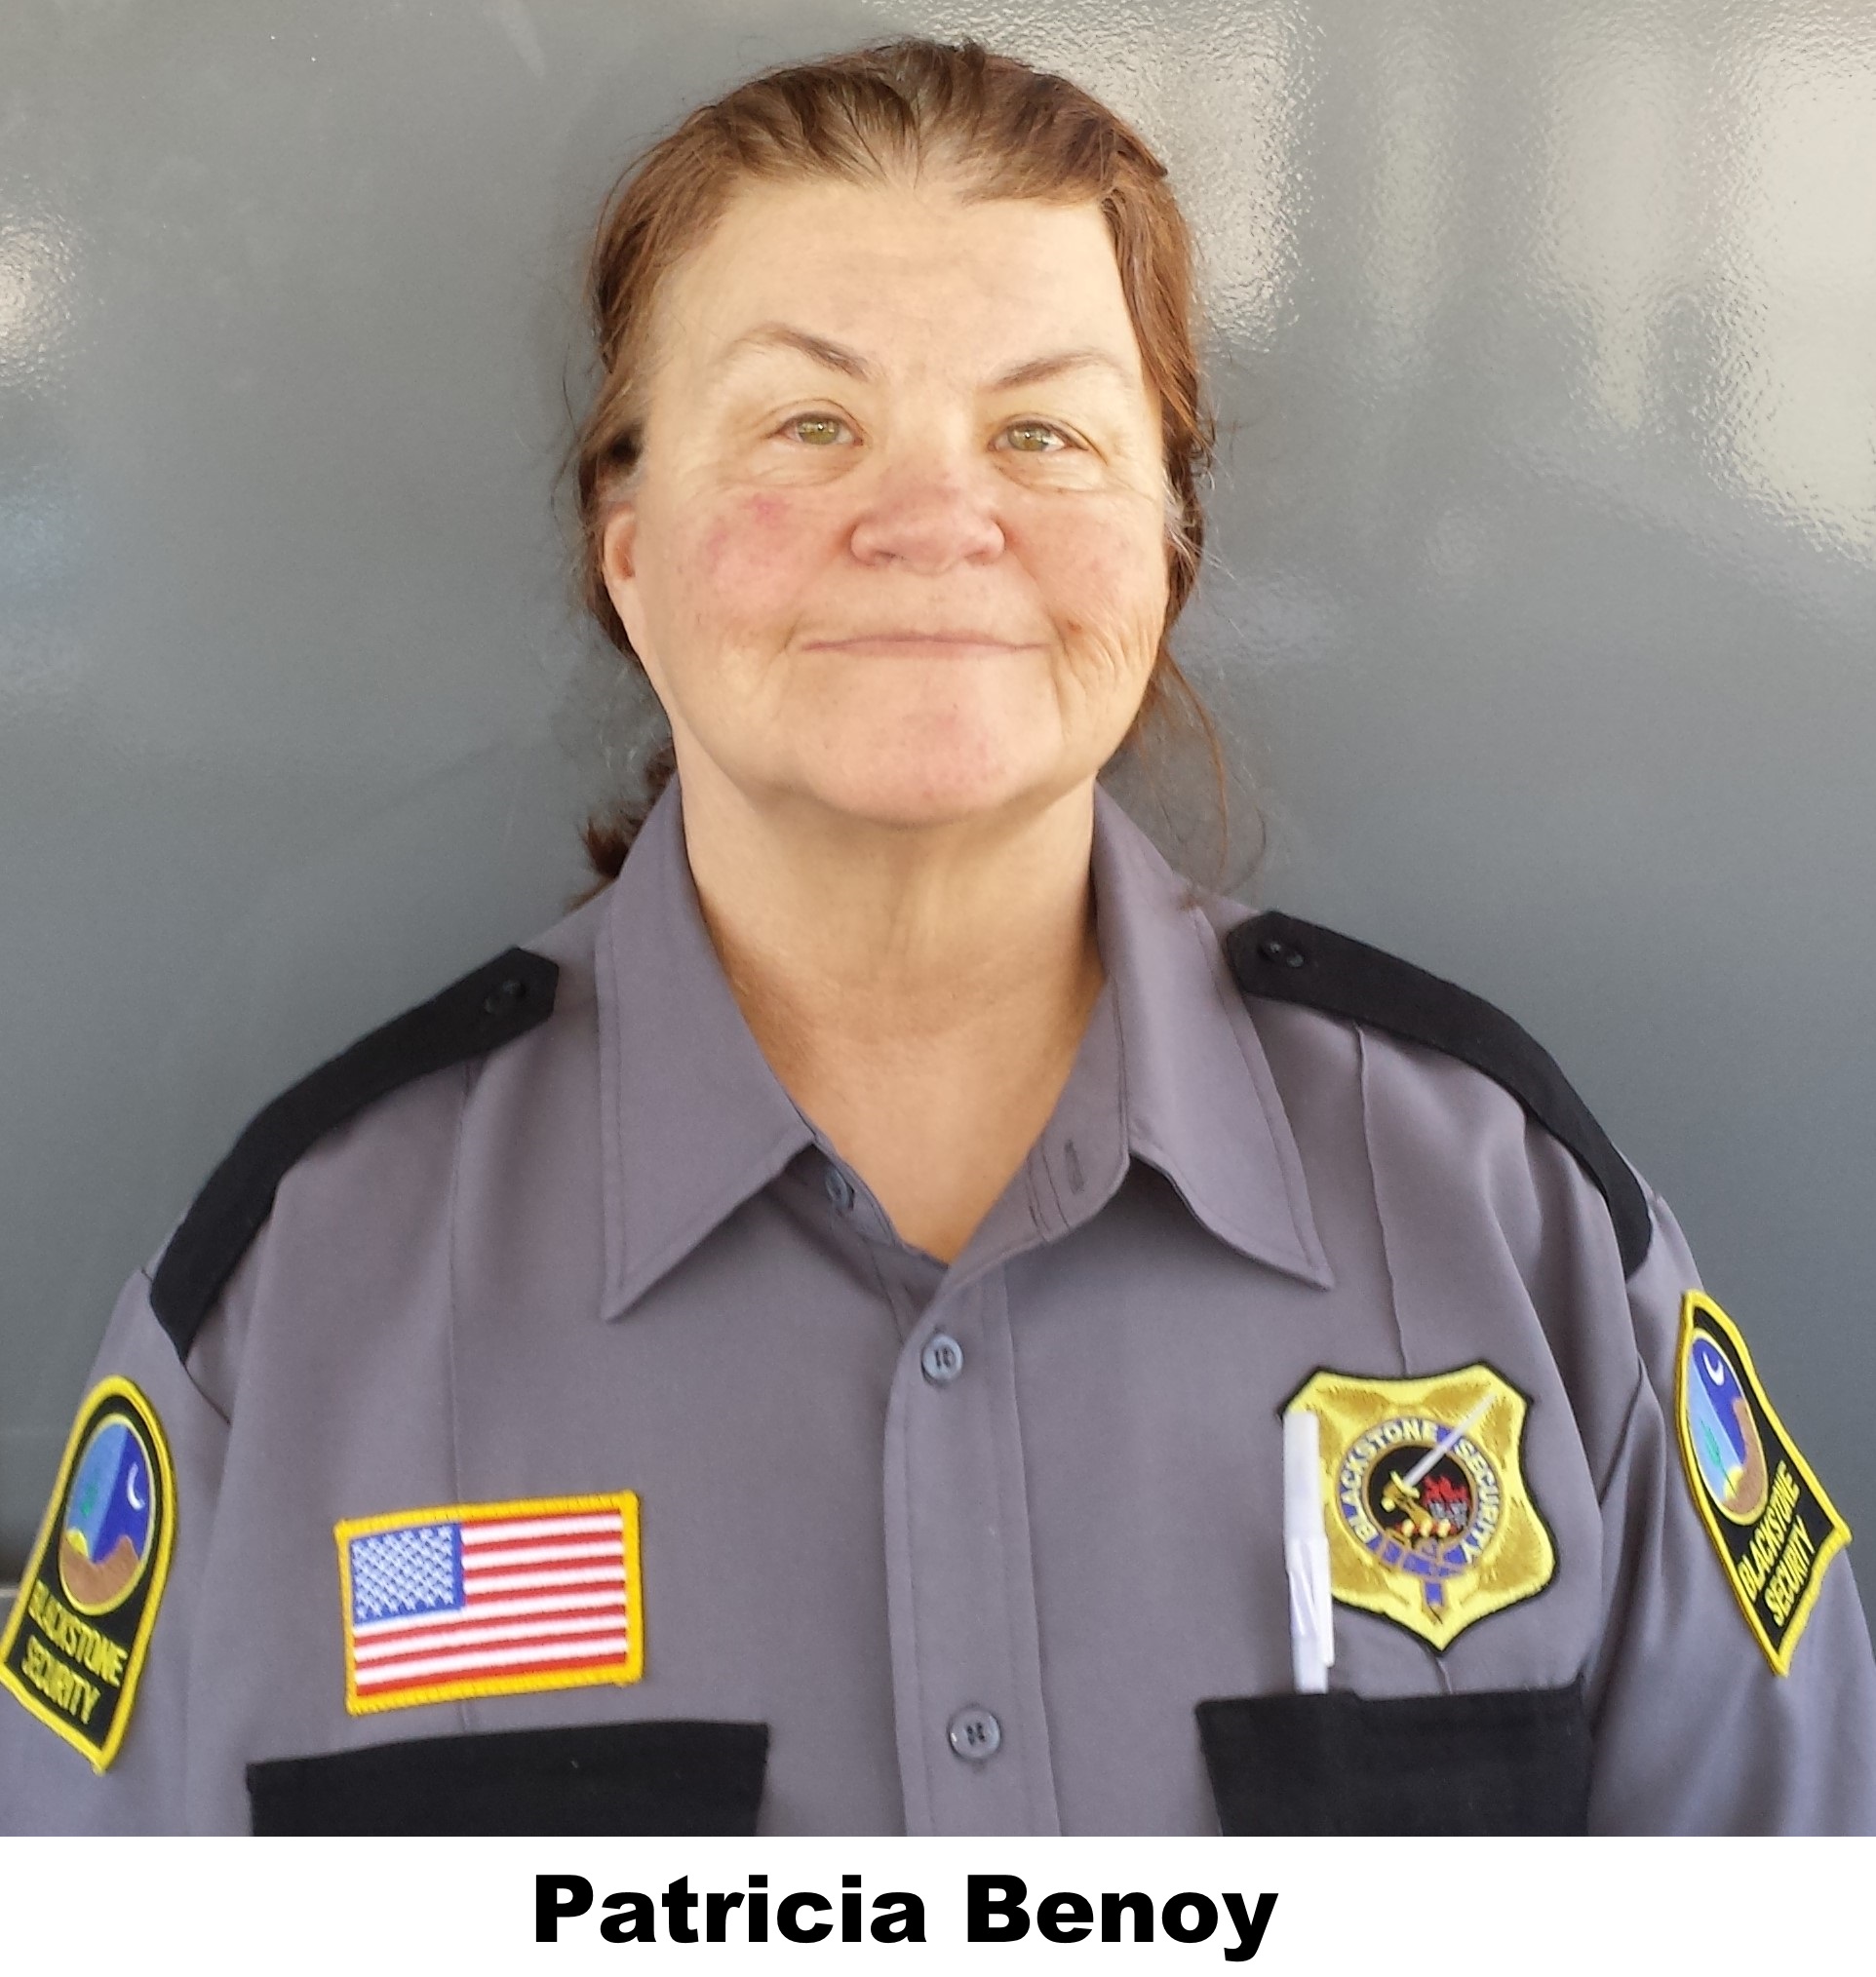 Patricia Benoy -Officer of the Year